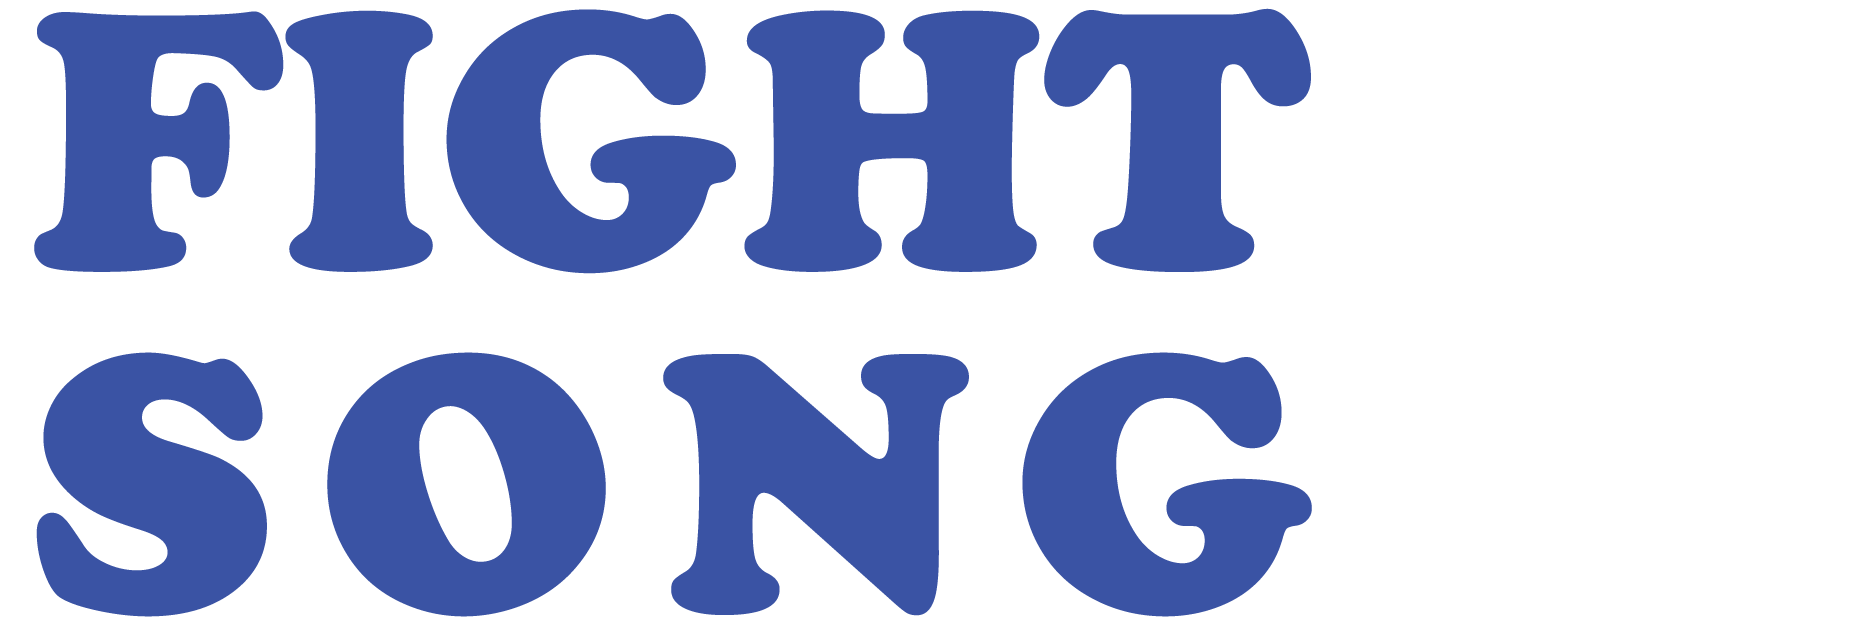 FightSong Logo